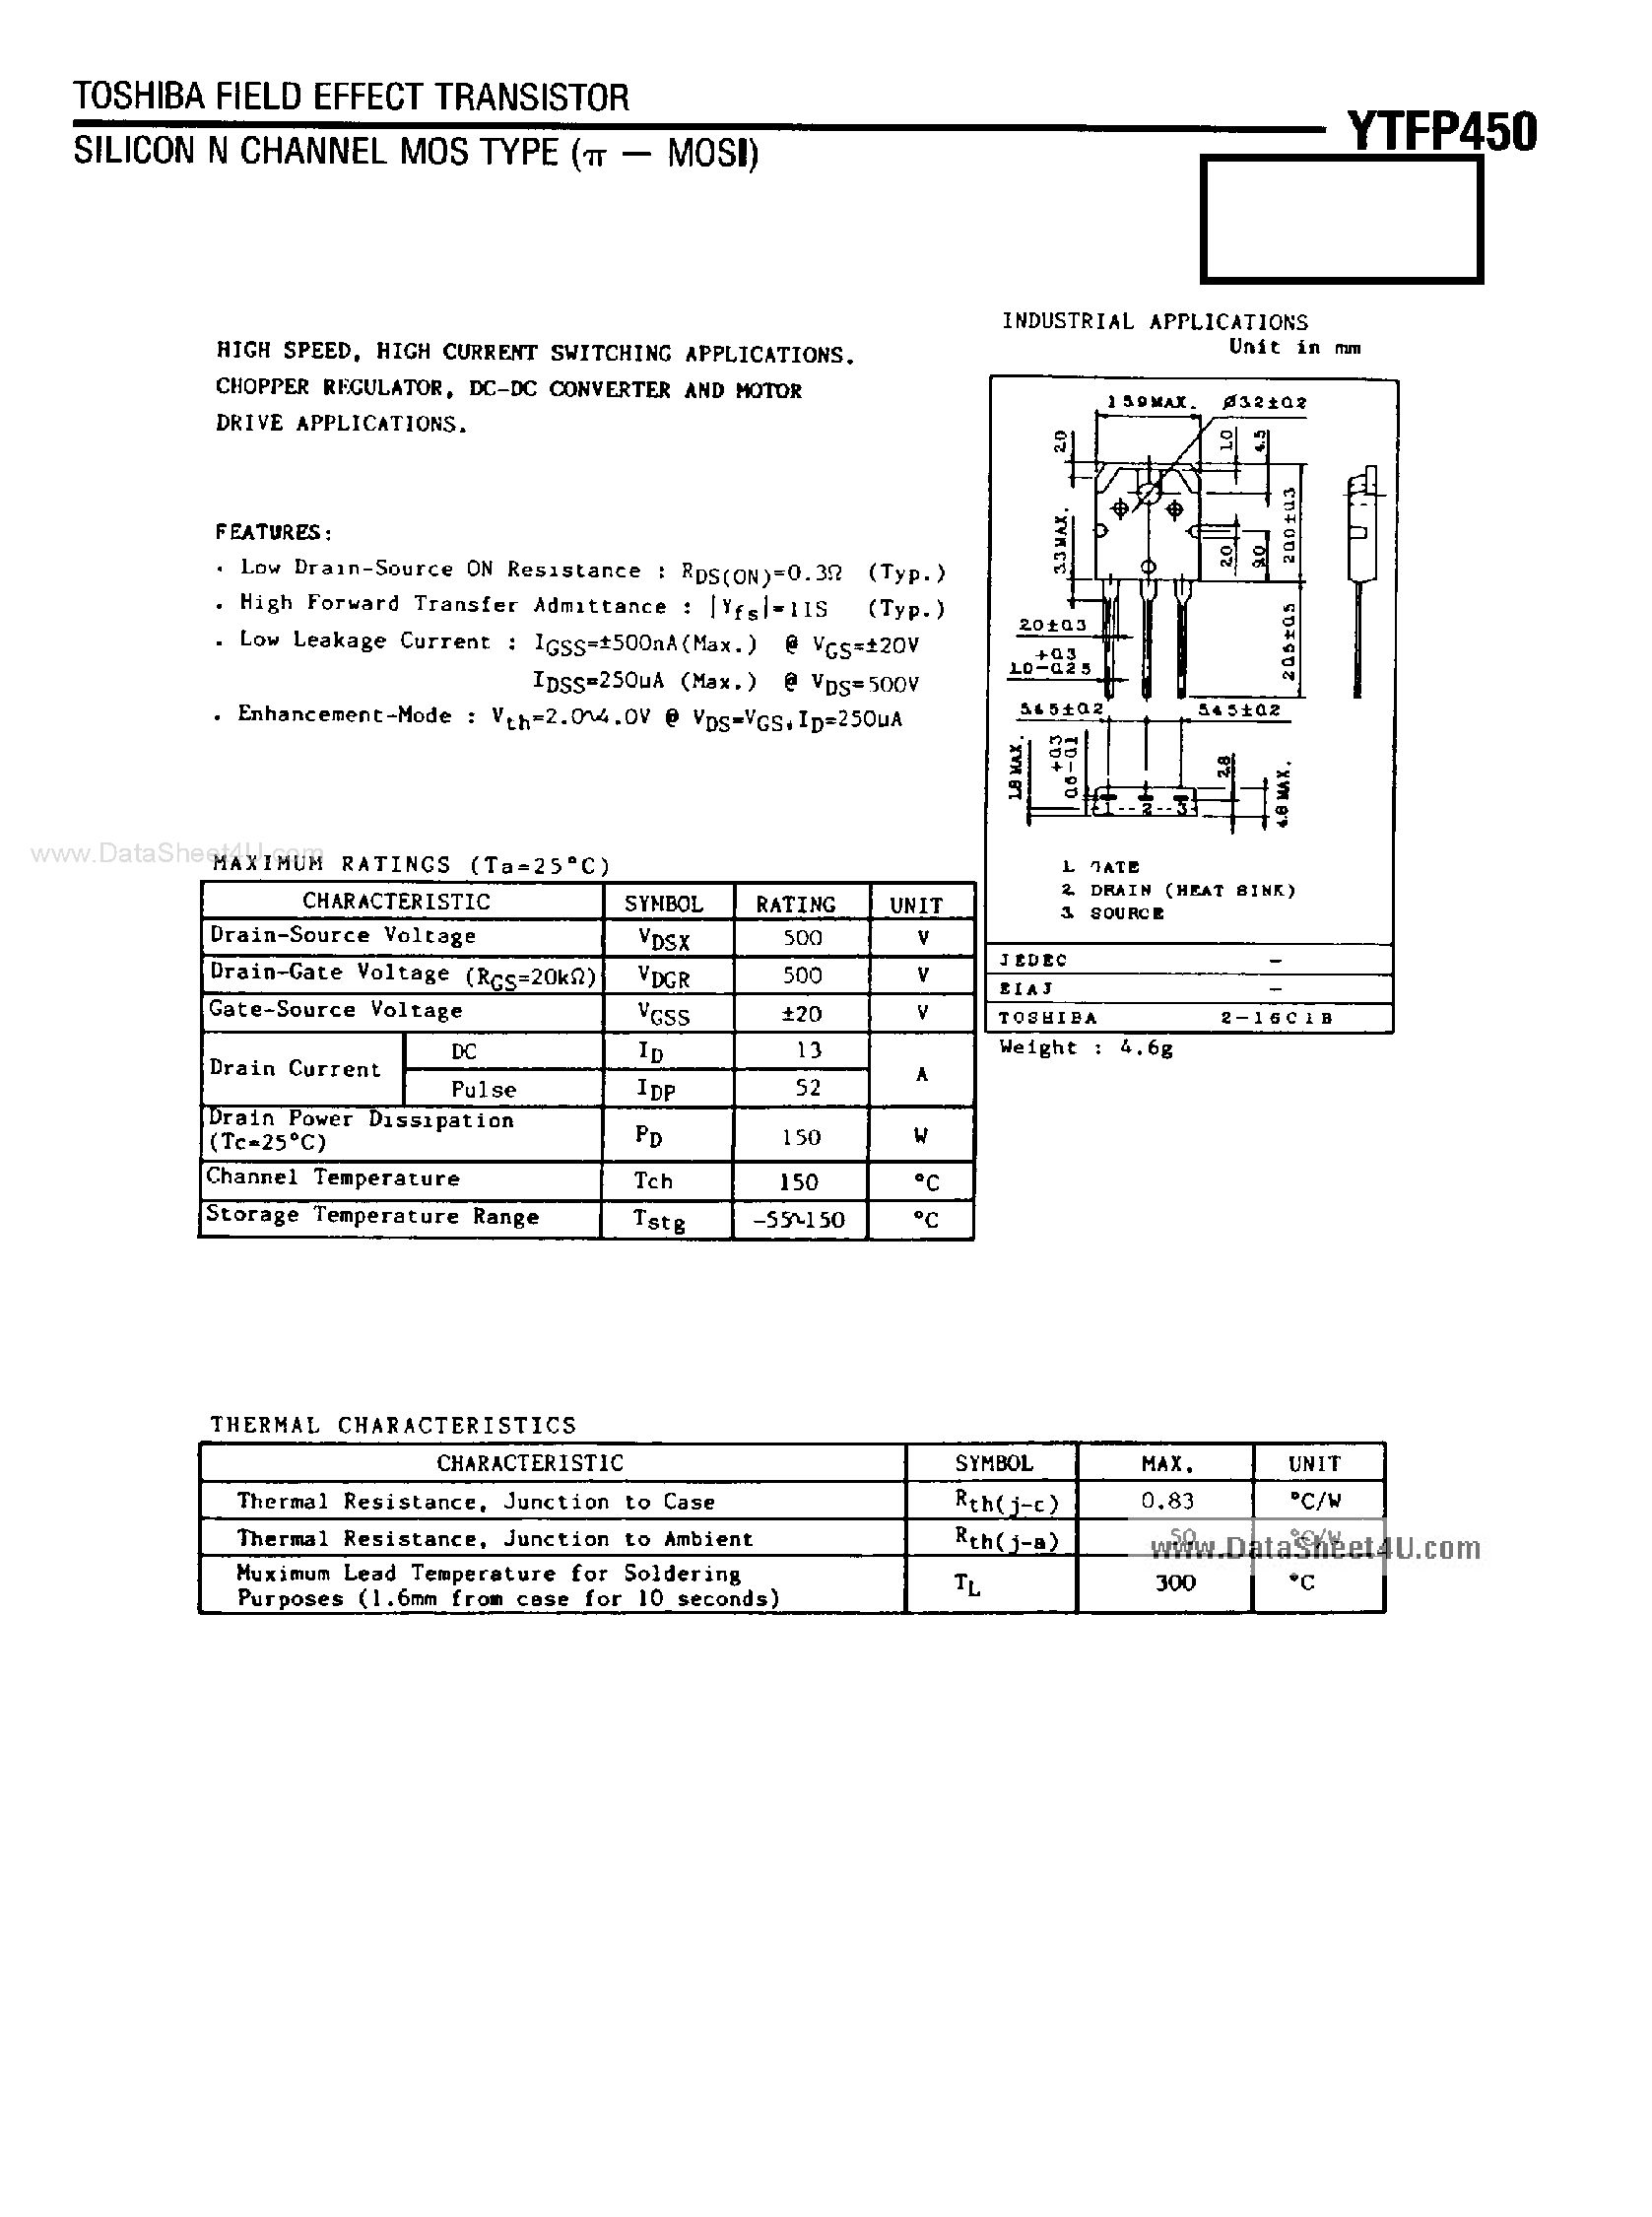 Datasheet YTFP450 - Silicon N-Channel MOS Type FET page 1